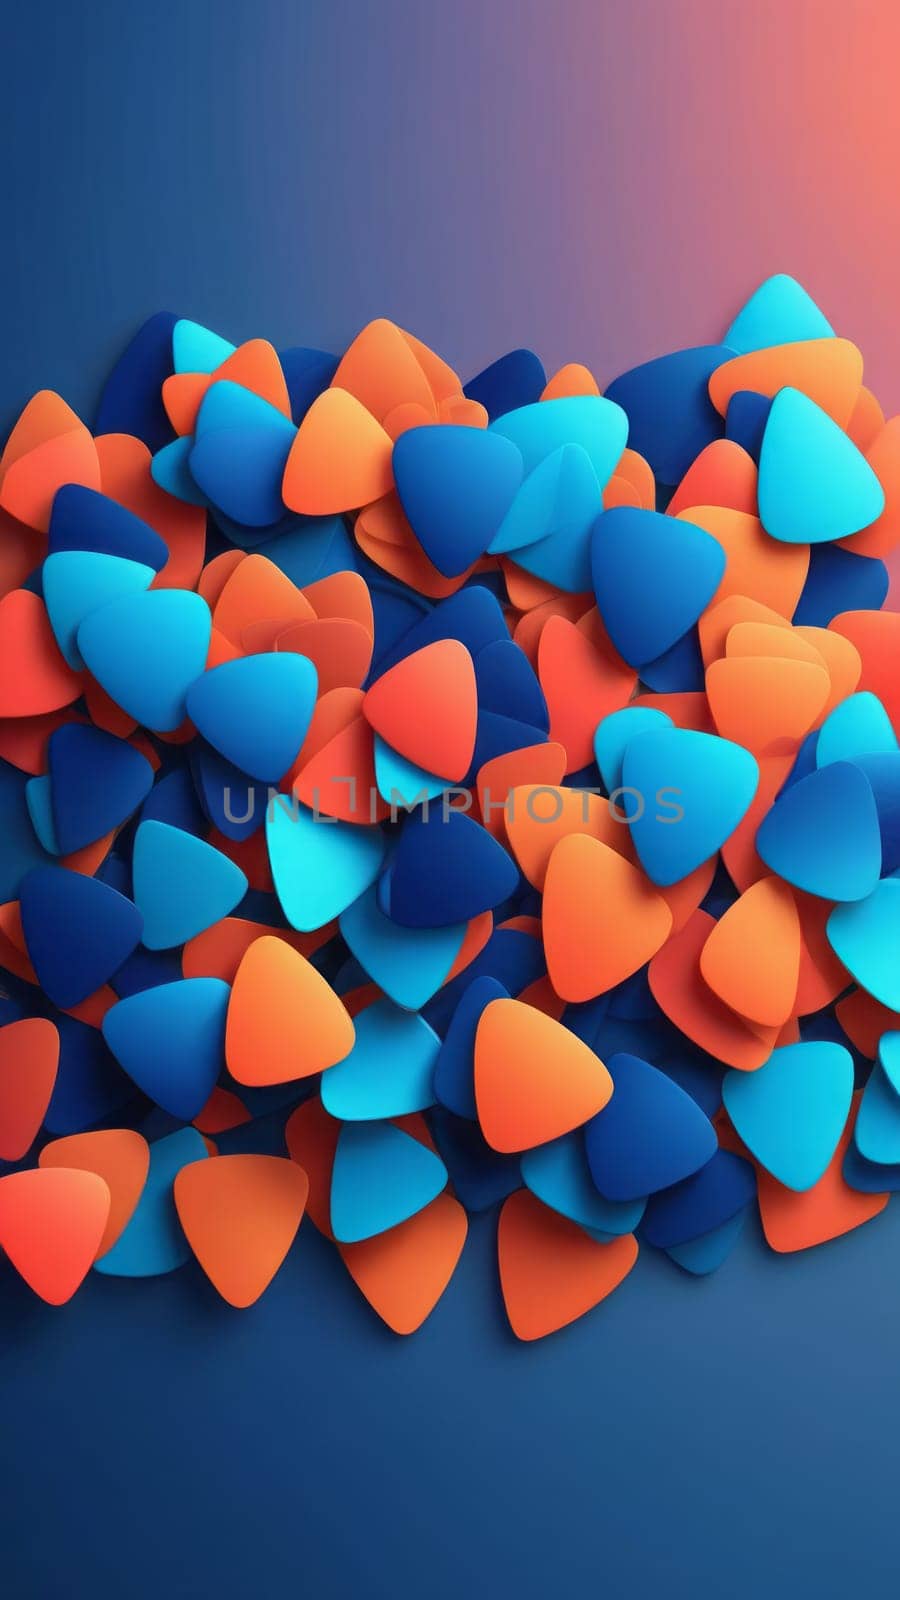 Colorful art from Plectrum shapes and blue by nkotlyar